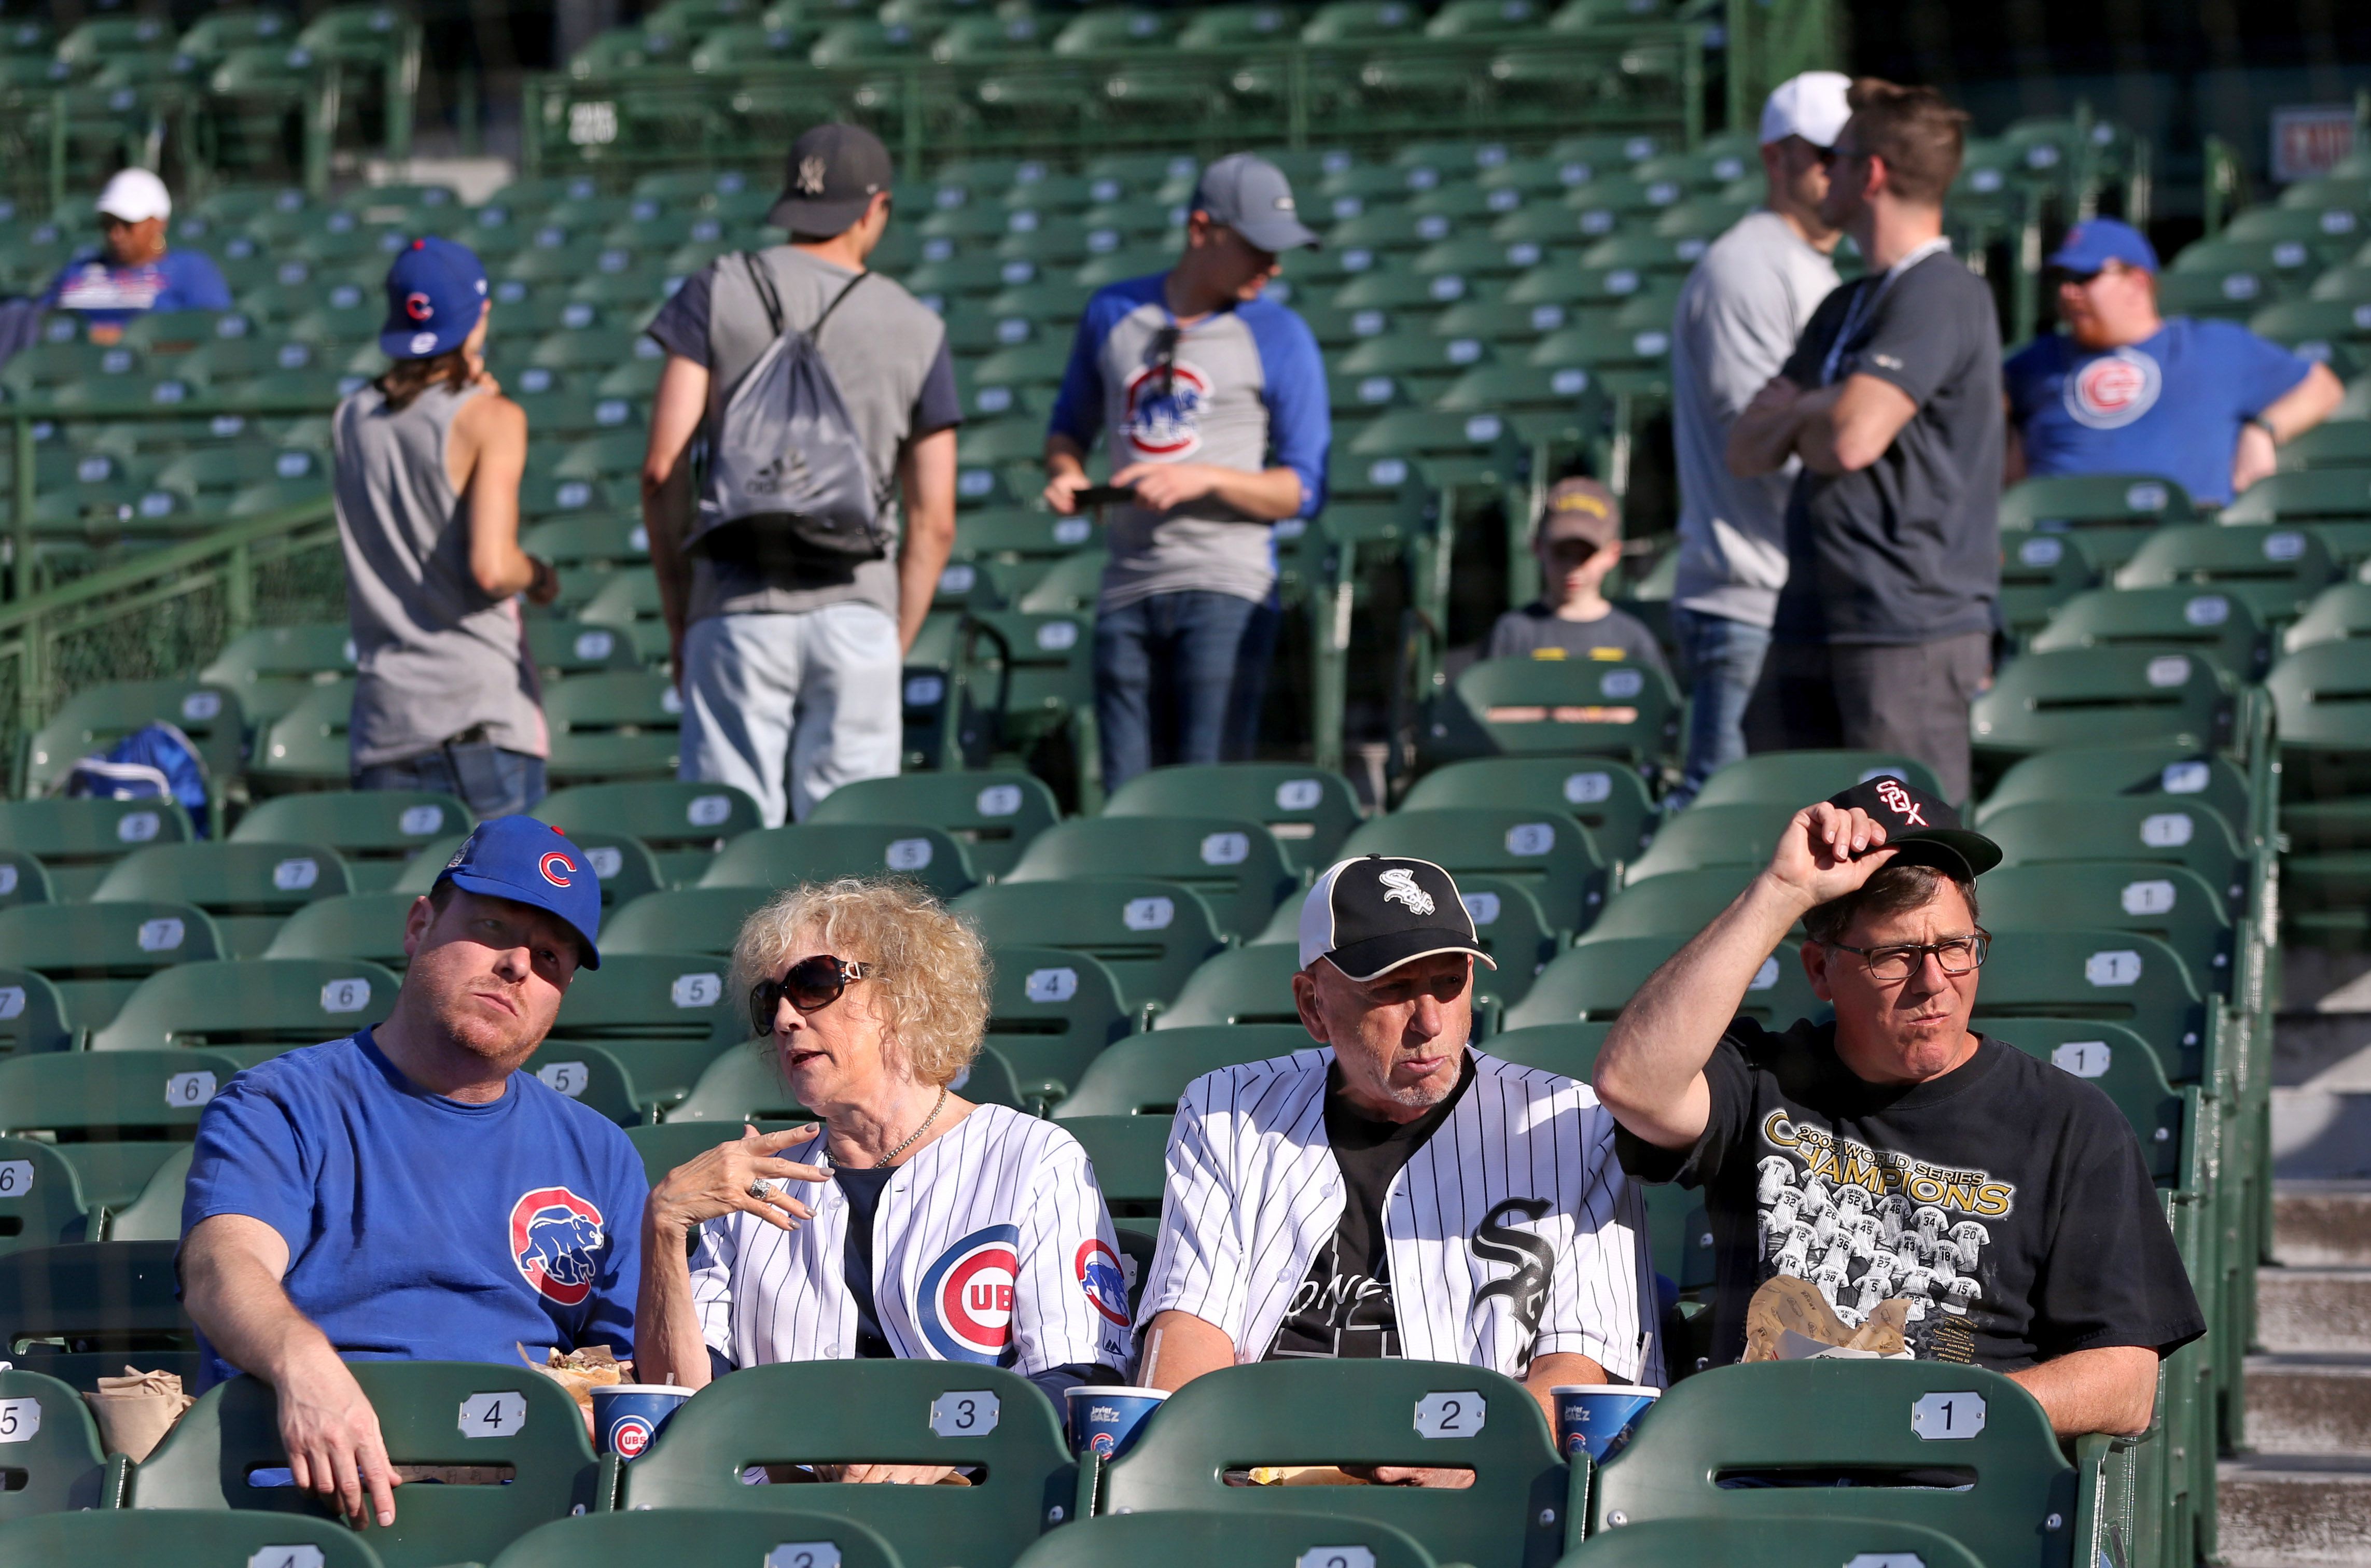 Cubs vs. White Sox: Fan Support by Neighborhood